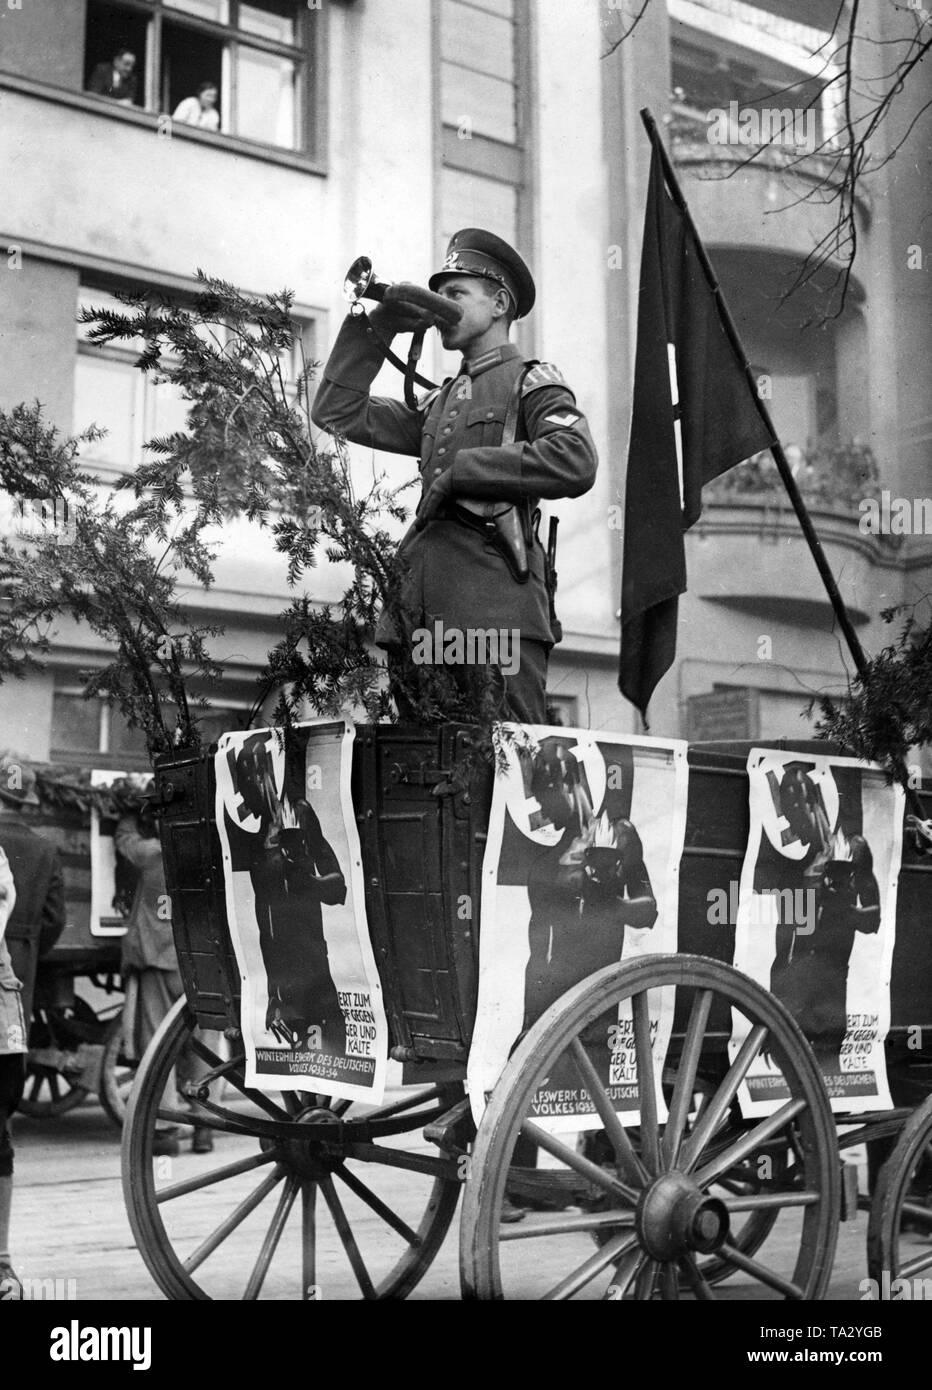 A Reichswehr trumpeter on a cart of the Winterhilfswerk with posters for the collection of clothes. Stock Photo